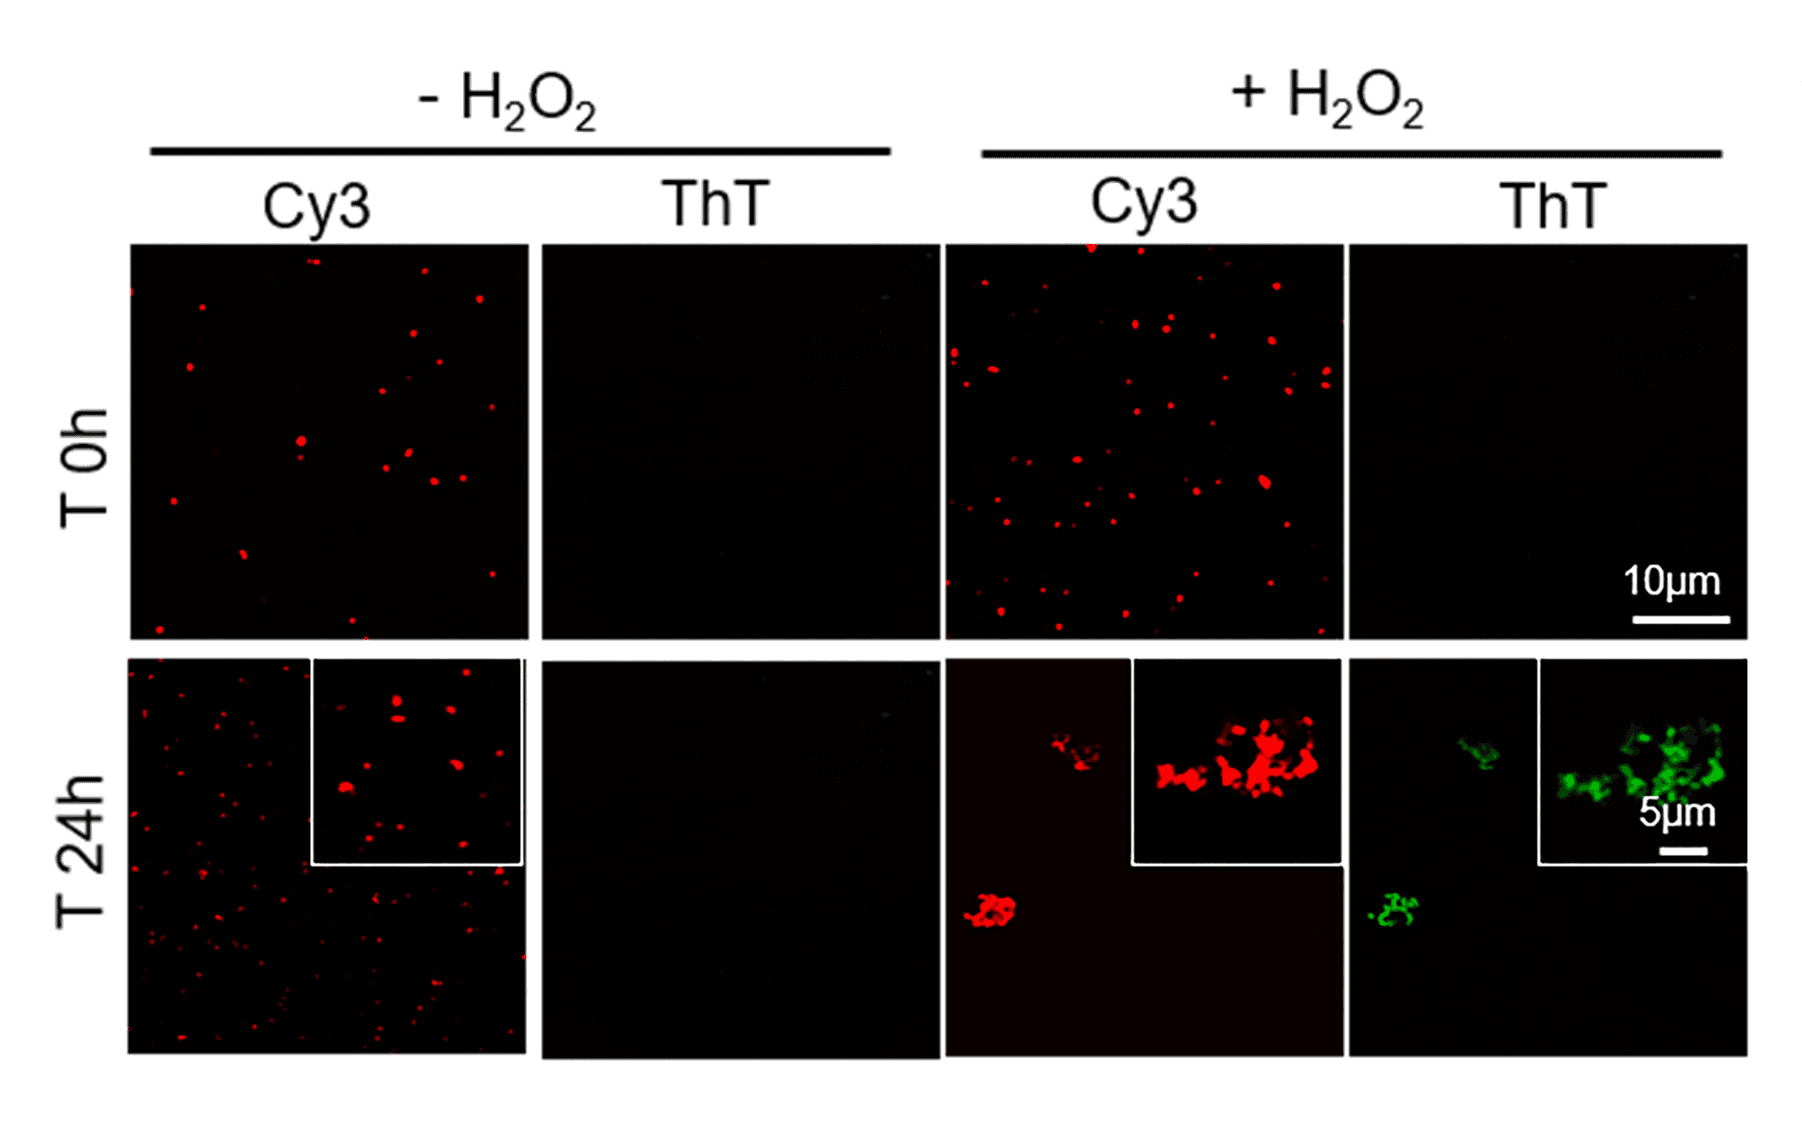 H2O2 promotes SOD1 phase separation. Confocal microscopy images of SOD1(100 μM, 15% PEG) colocalized with 20 μM ThT in the presence or absence of 1 mM H2O2 (at room temperature for 24 h). Scale bar represents 10 μm. Source: Figure from <b>A liquid-to-solid phase transition of Cu/Zn superoxide dismutase 1 initiated by oxidation and disease mutation</b> by Gu et al. <em>Journal of Biological Chemistry</em>, Feb. 2023.